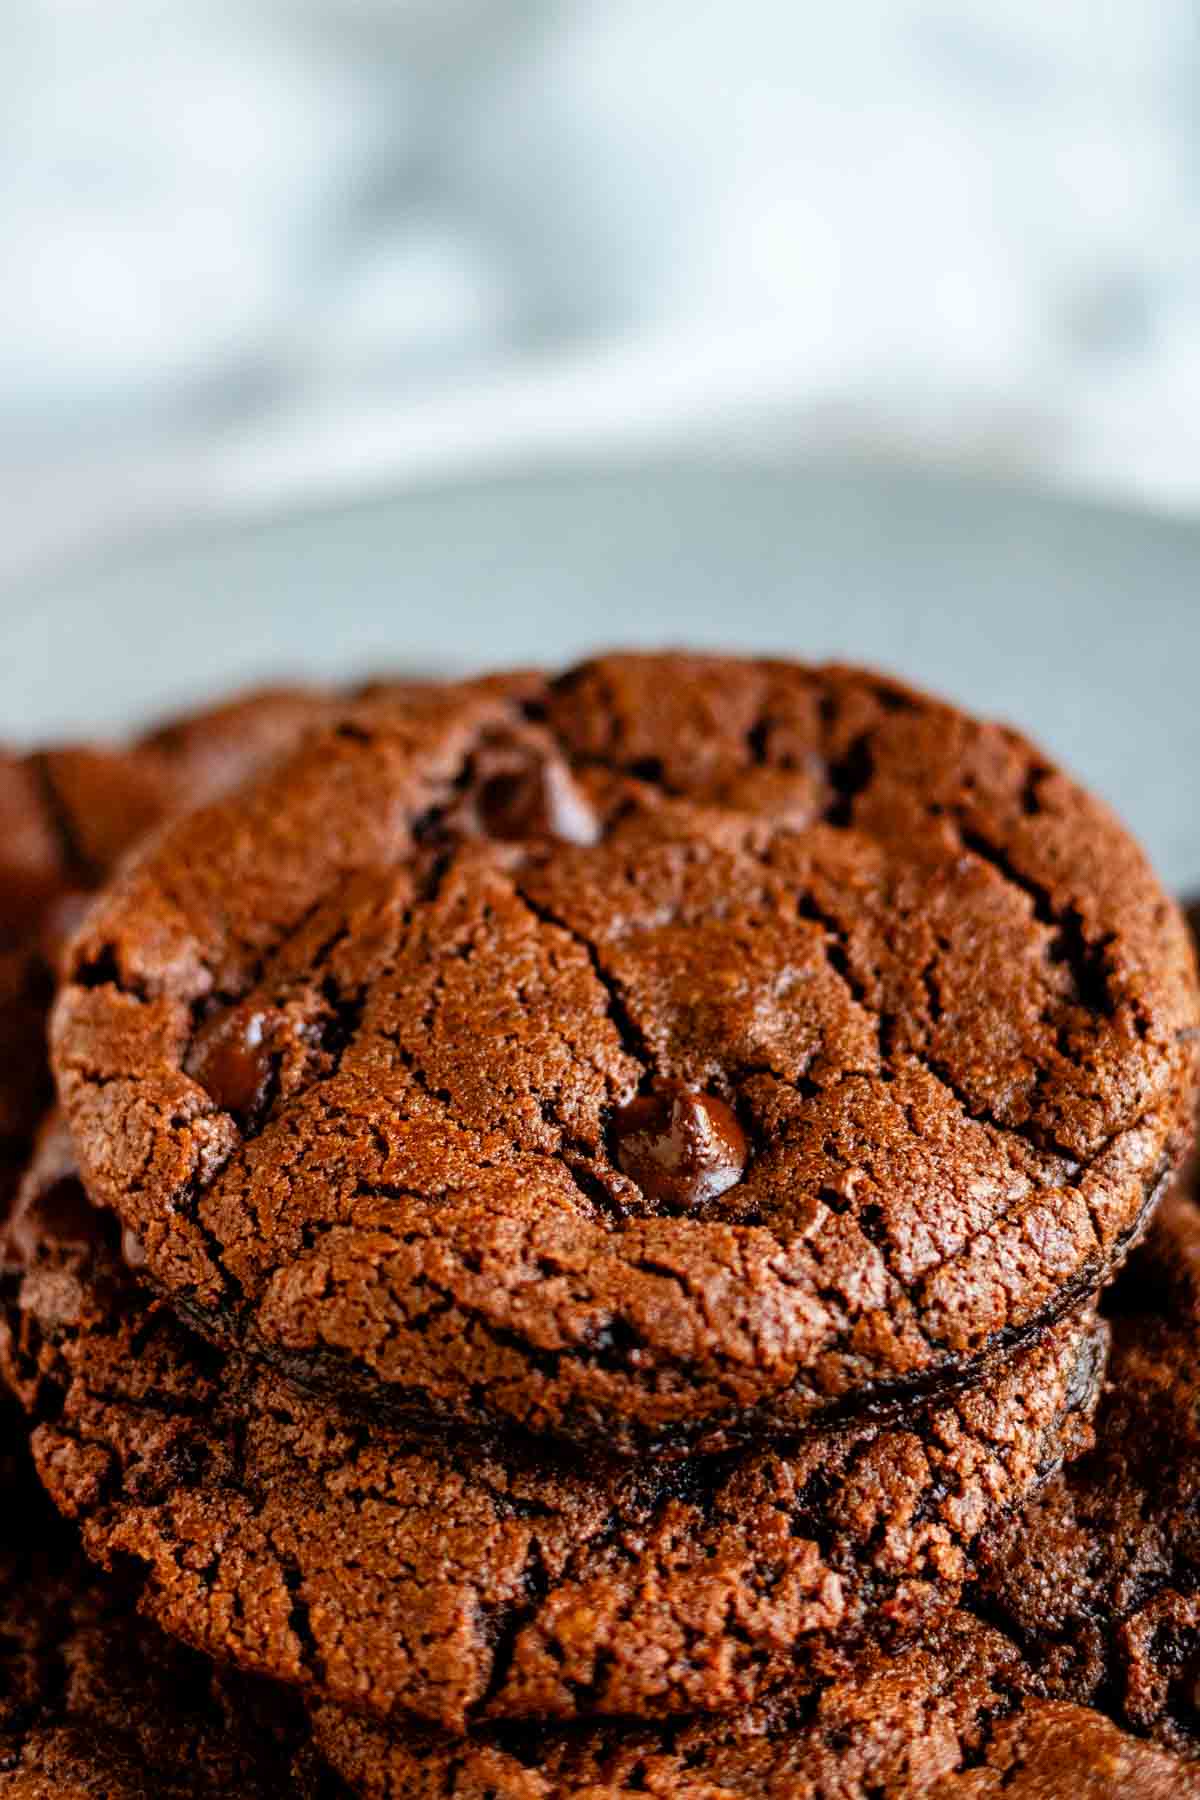 A plate of chocolate chocolate chip cookies.